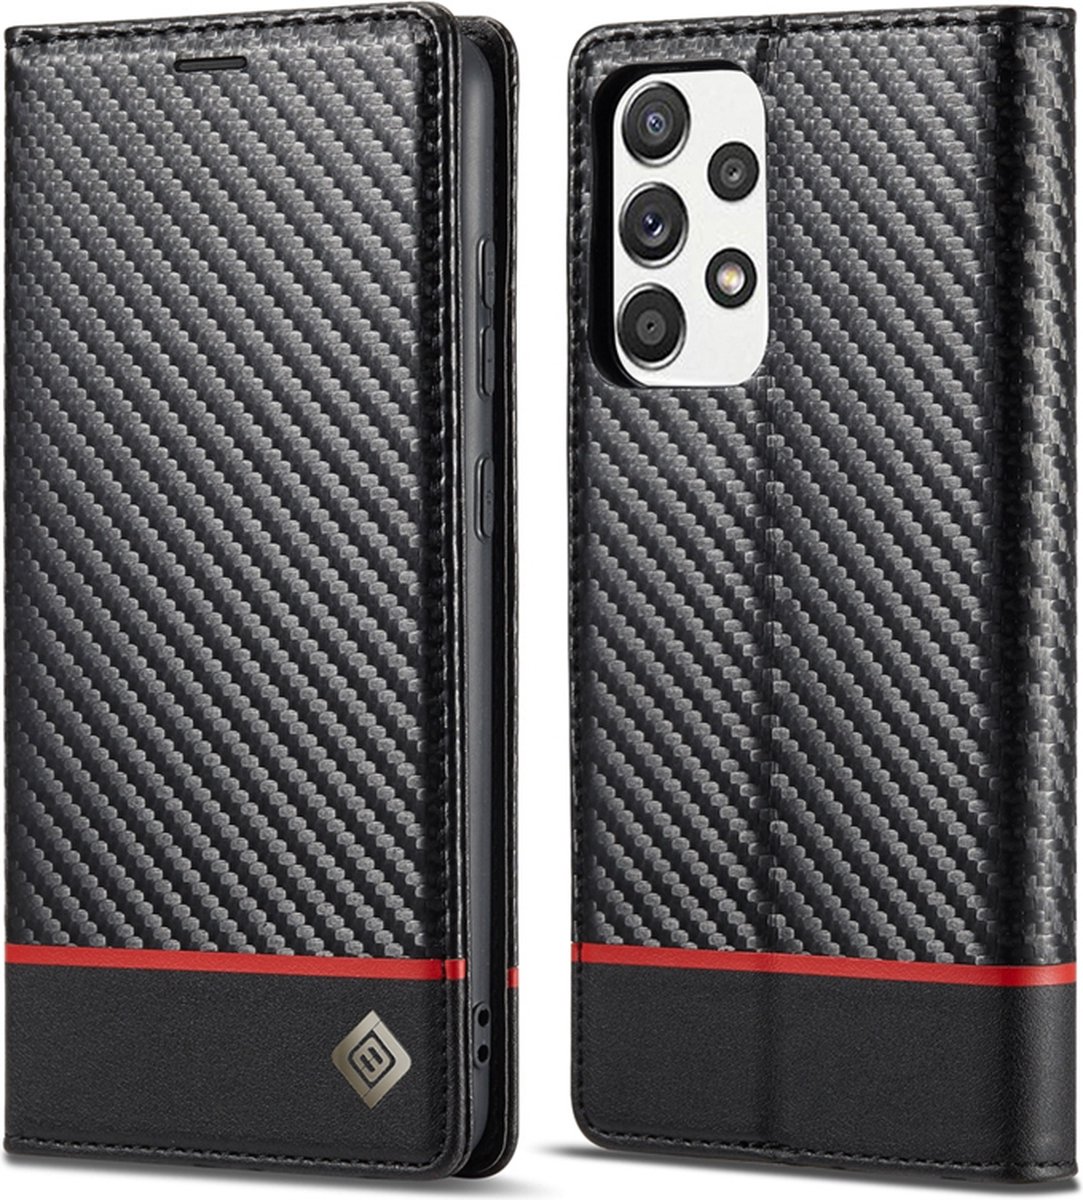 Luxe BookCover Hoes Etui voor Samsung Galaxy A52 Zwart-Rood-Carbon *2